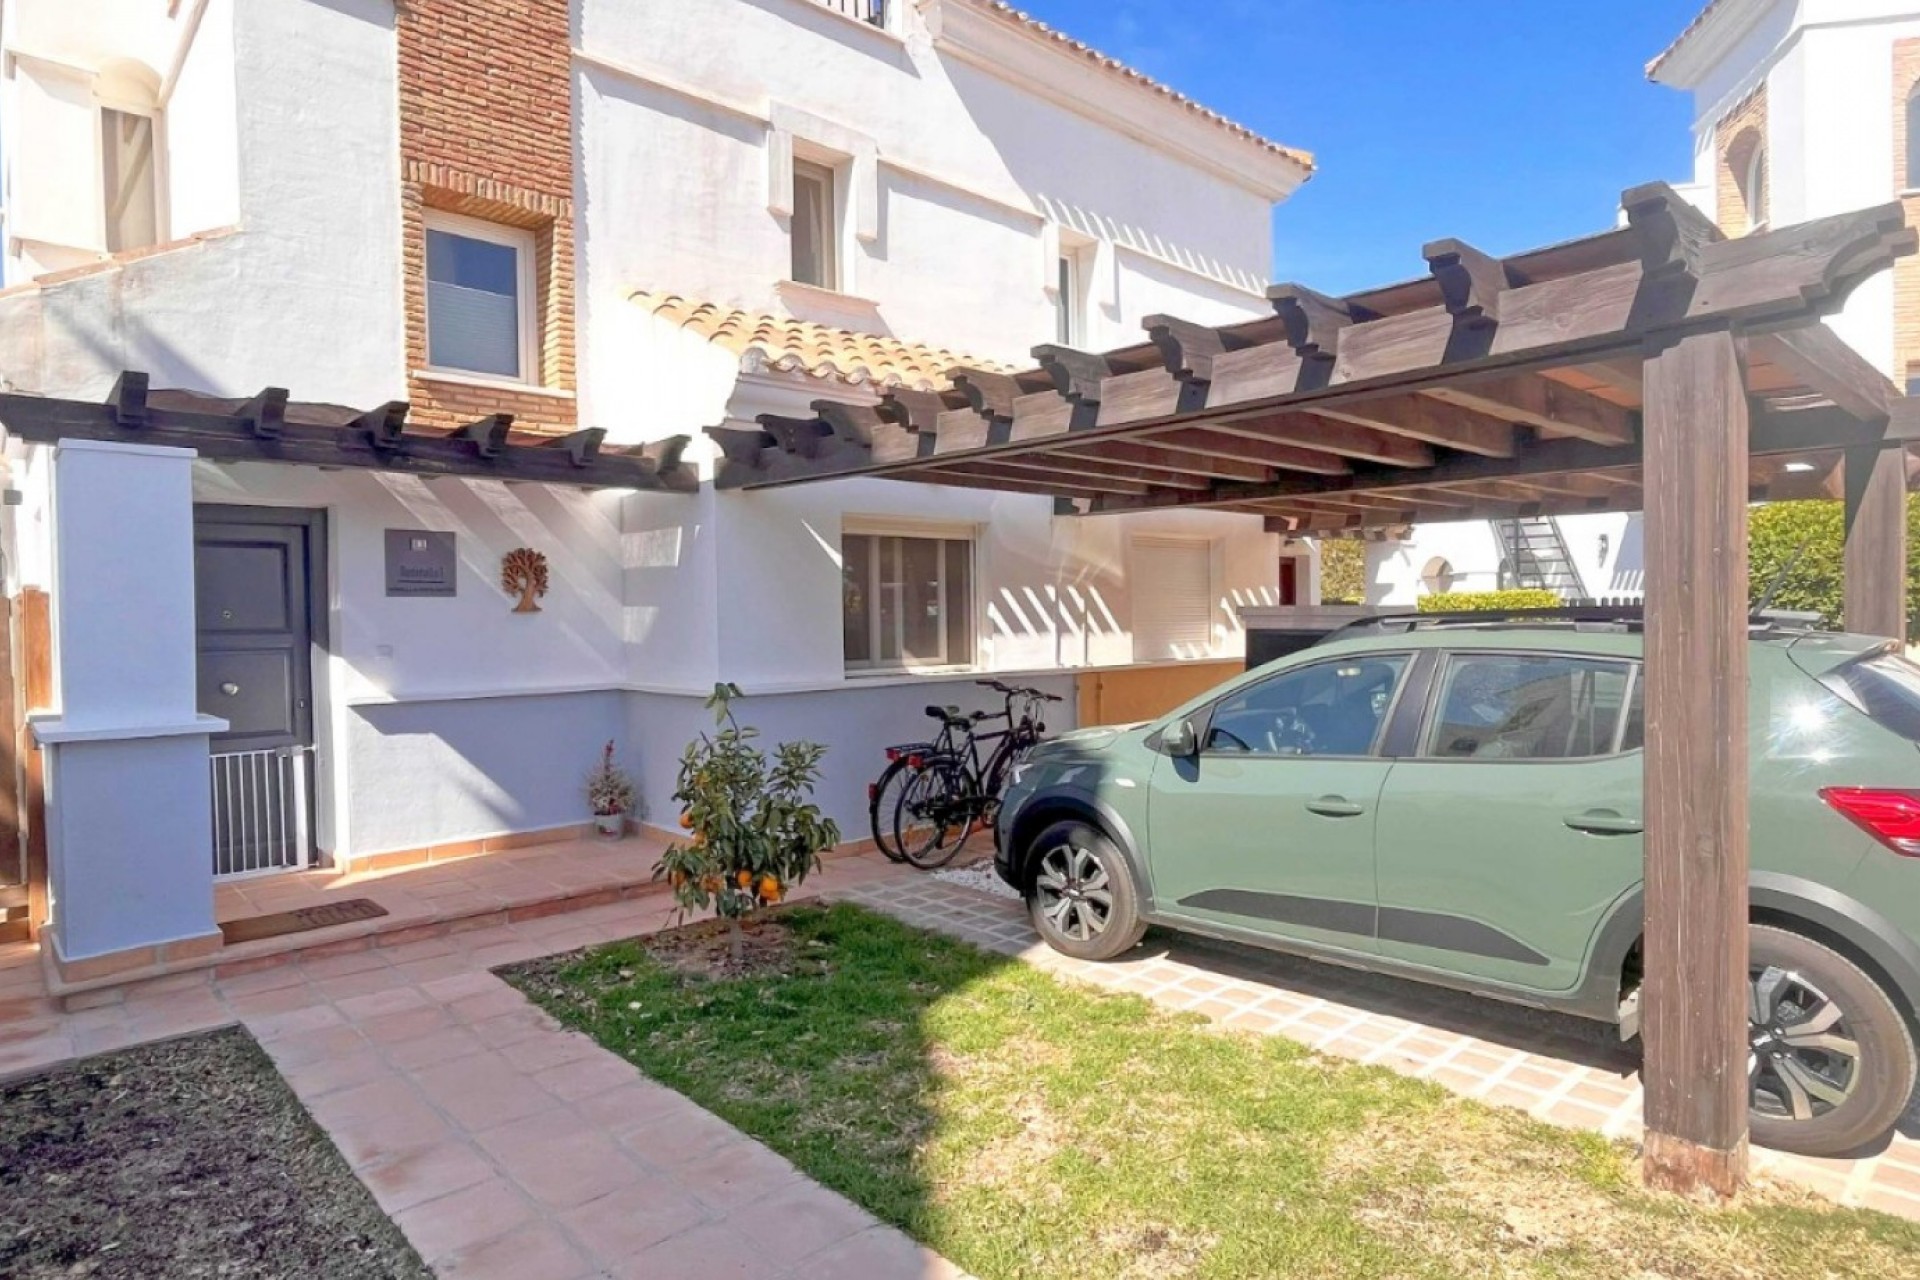 Reventa - Town house -
Torre Pacheco - Inland